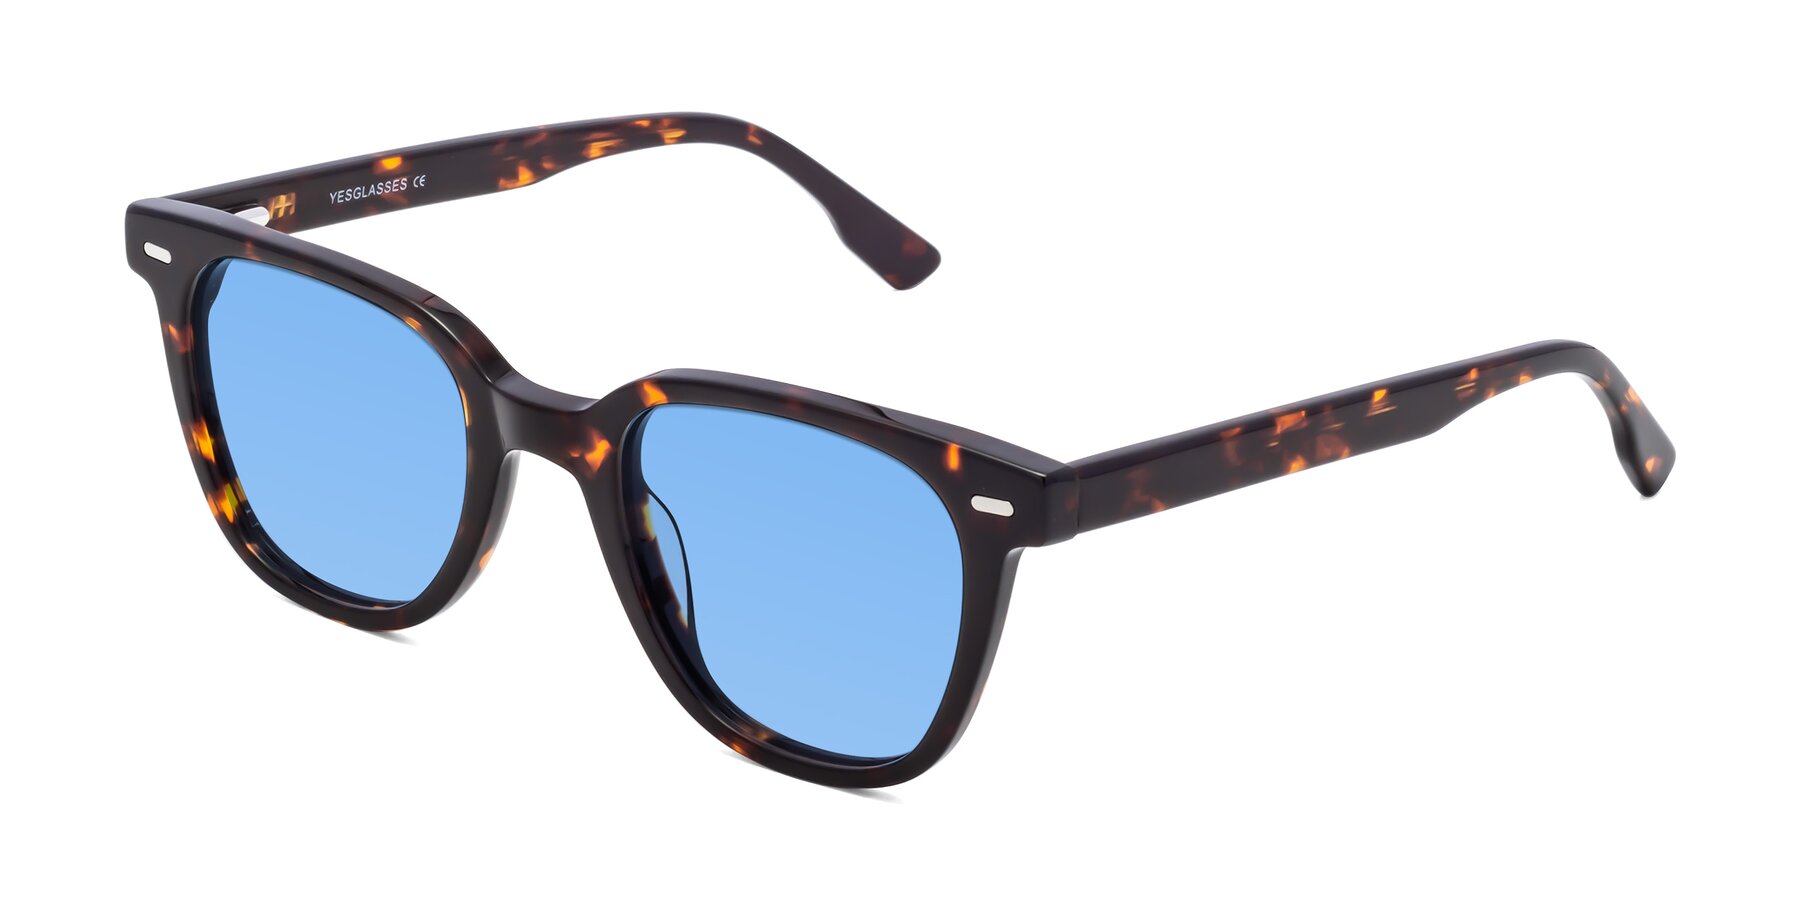 Angle of Beacon in Tortoise with Medium Blue Tinted Lenses